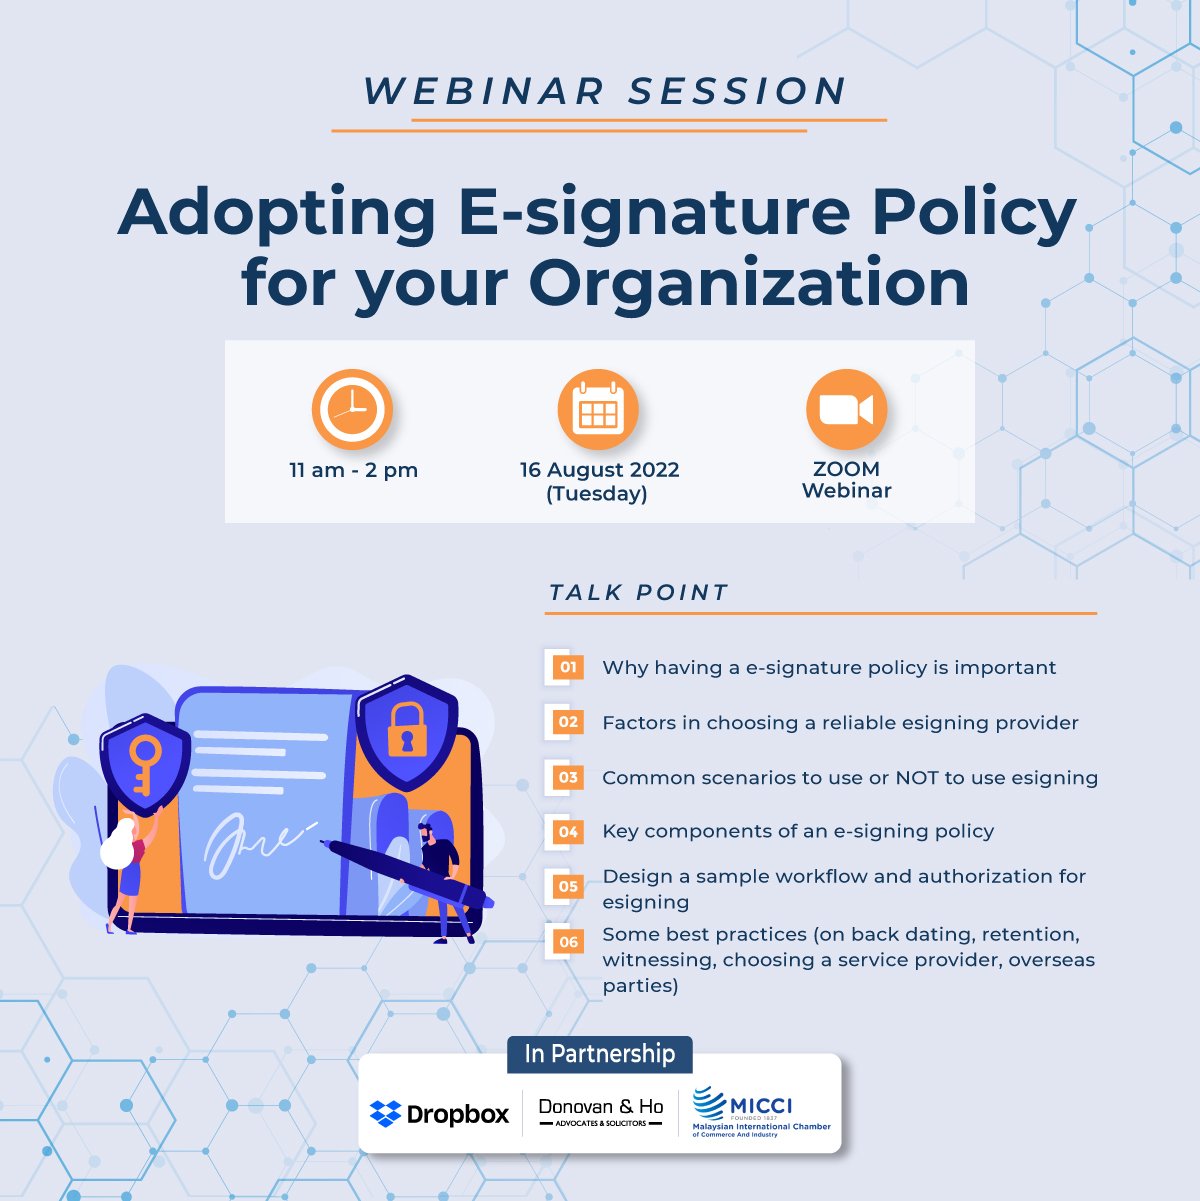 [Dropbox X MICCI Webinar] Adopting E-signature Policy for your Organisation